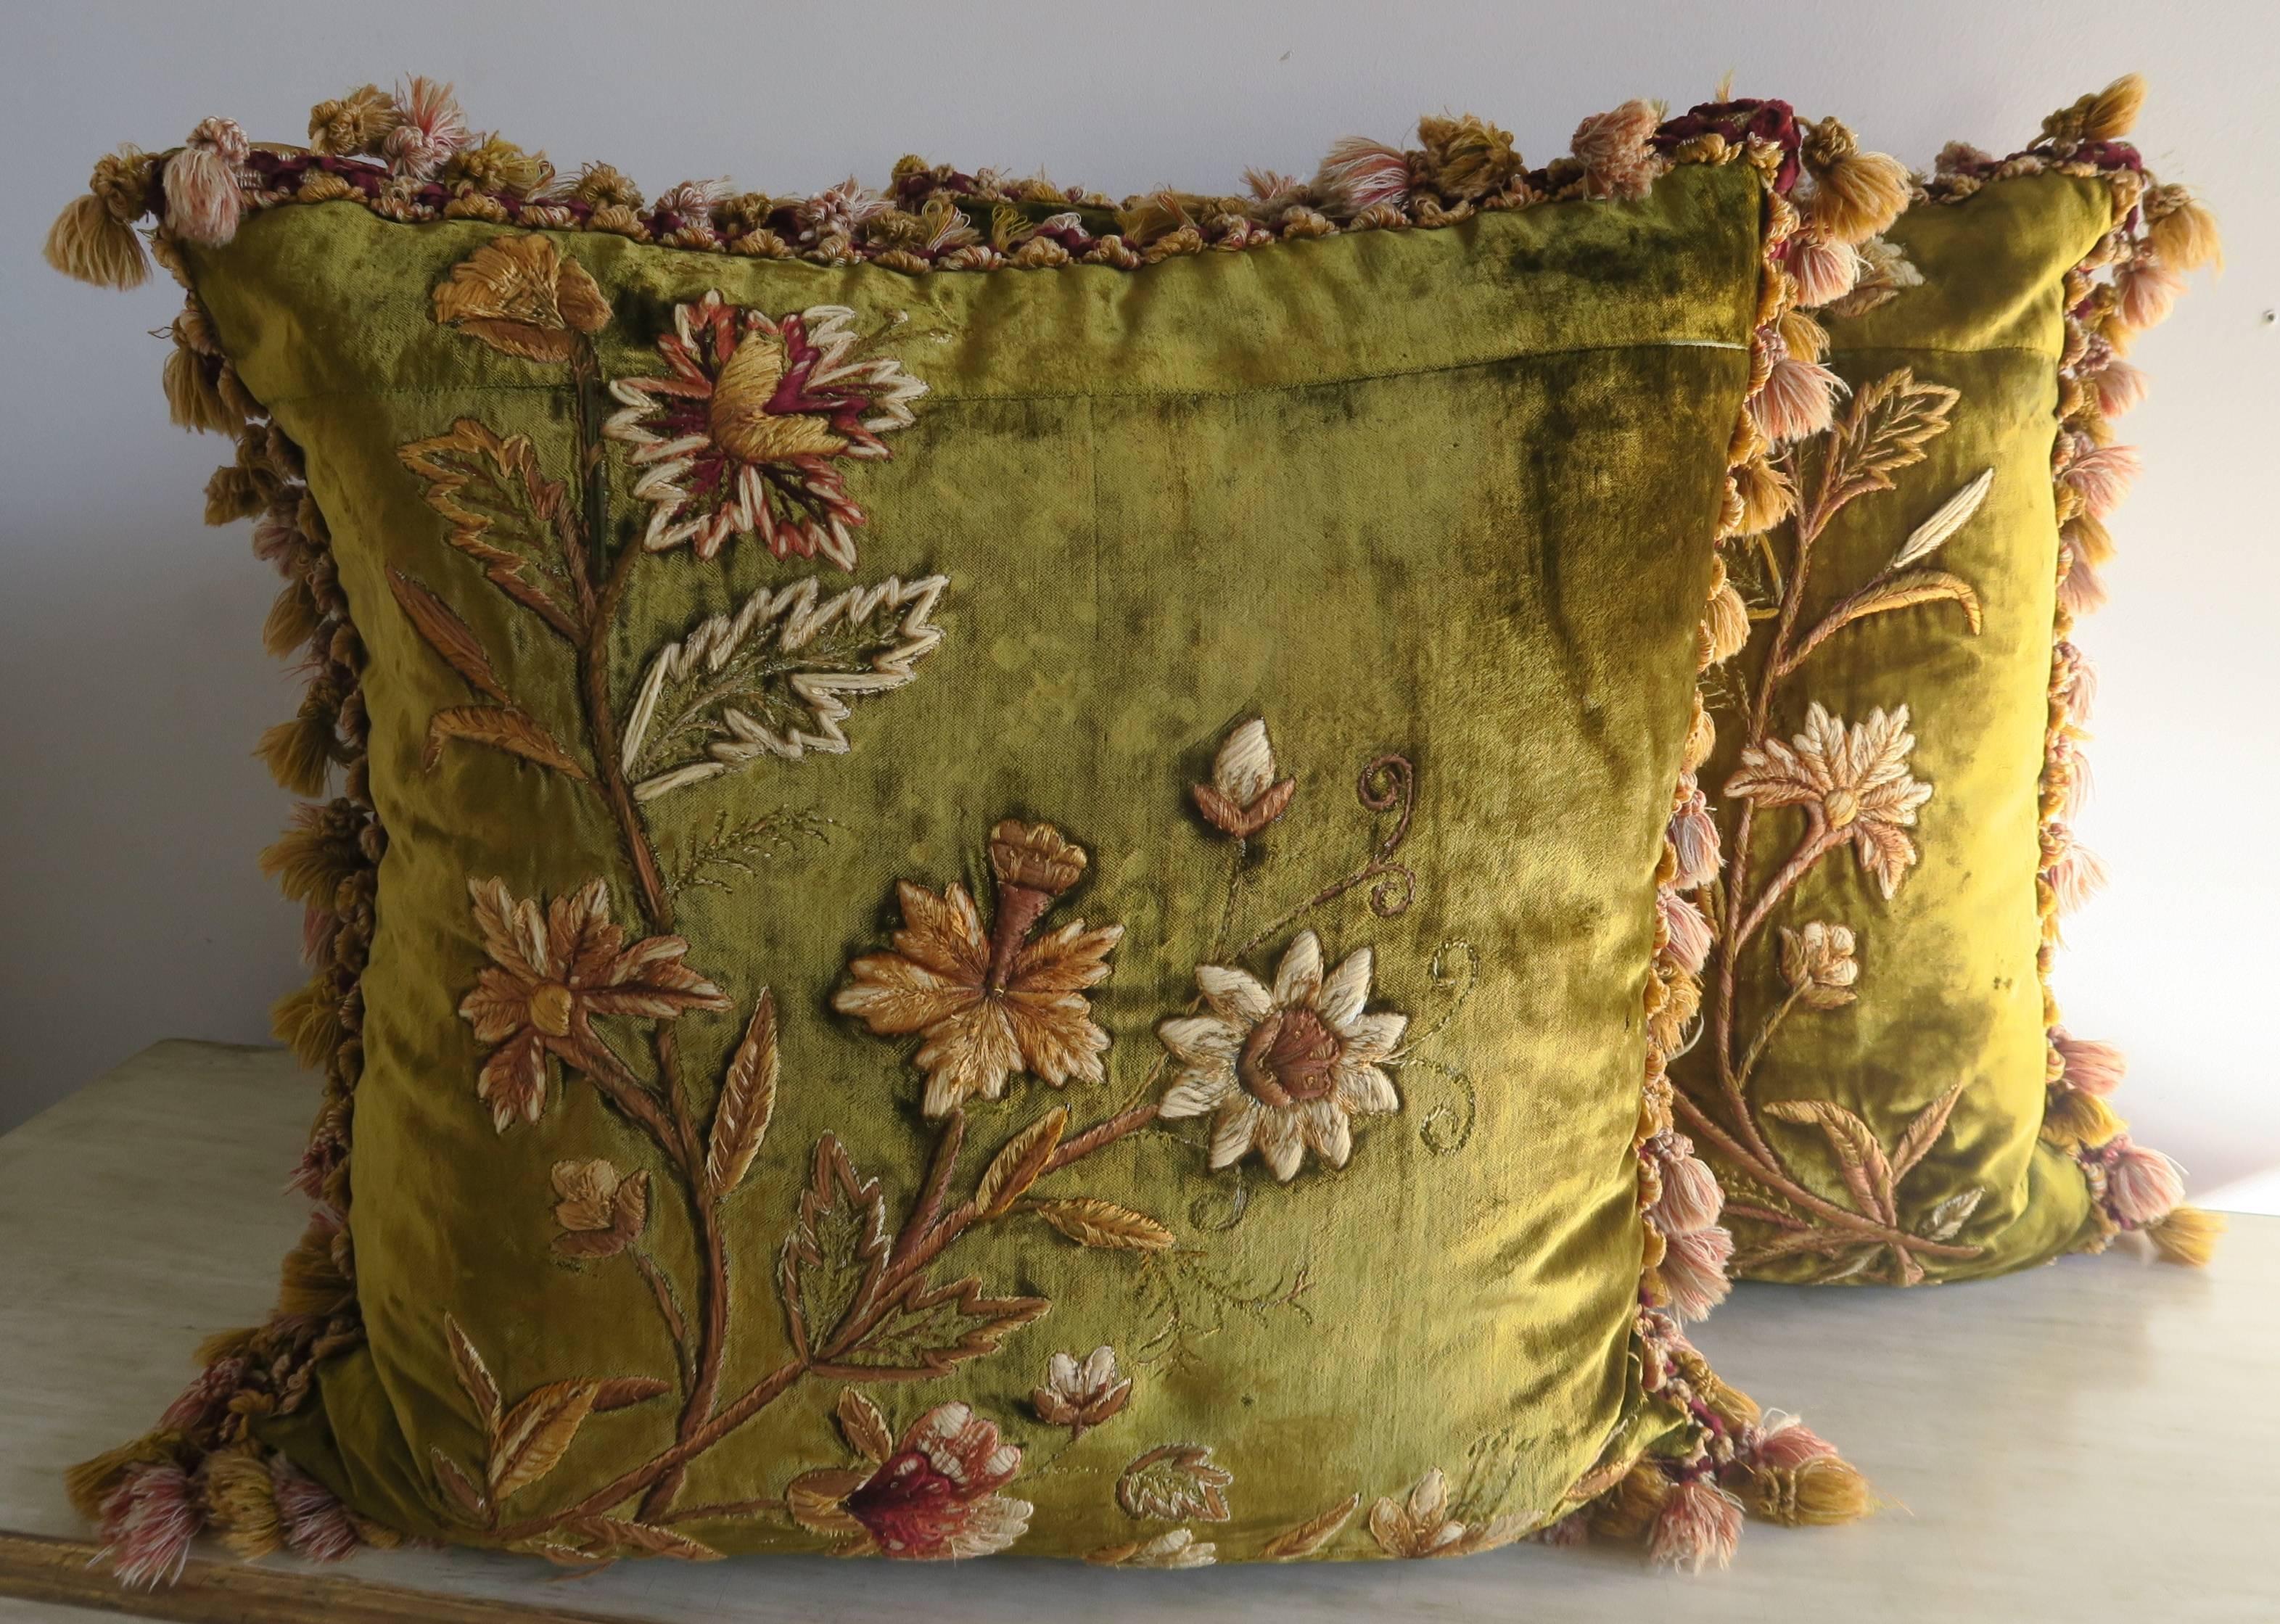 Pair of custom pillows design by Melissa Levinson. This pair of pillows is made from 19th century hand embroidered green silk velvet fronts and gold silk taffeta backs. Antique tassel trim around the sides of both pillows. Down inserts.